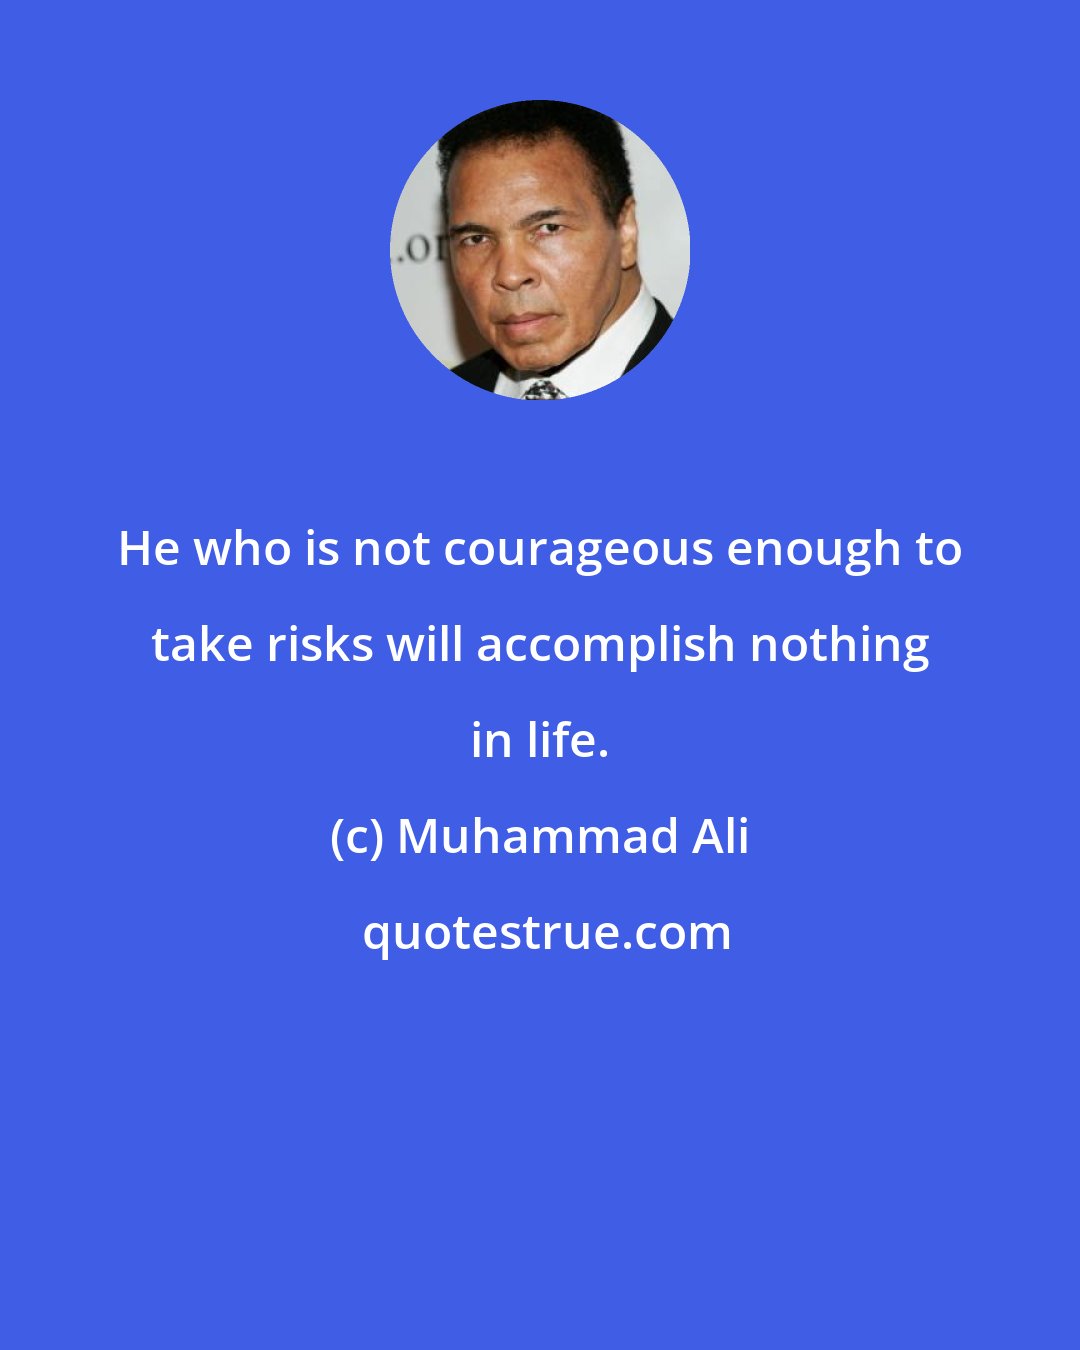 Muhammad Ali: He who is not courageous enough to take risks will accomplish nothing in life.